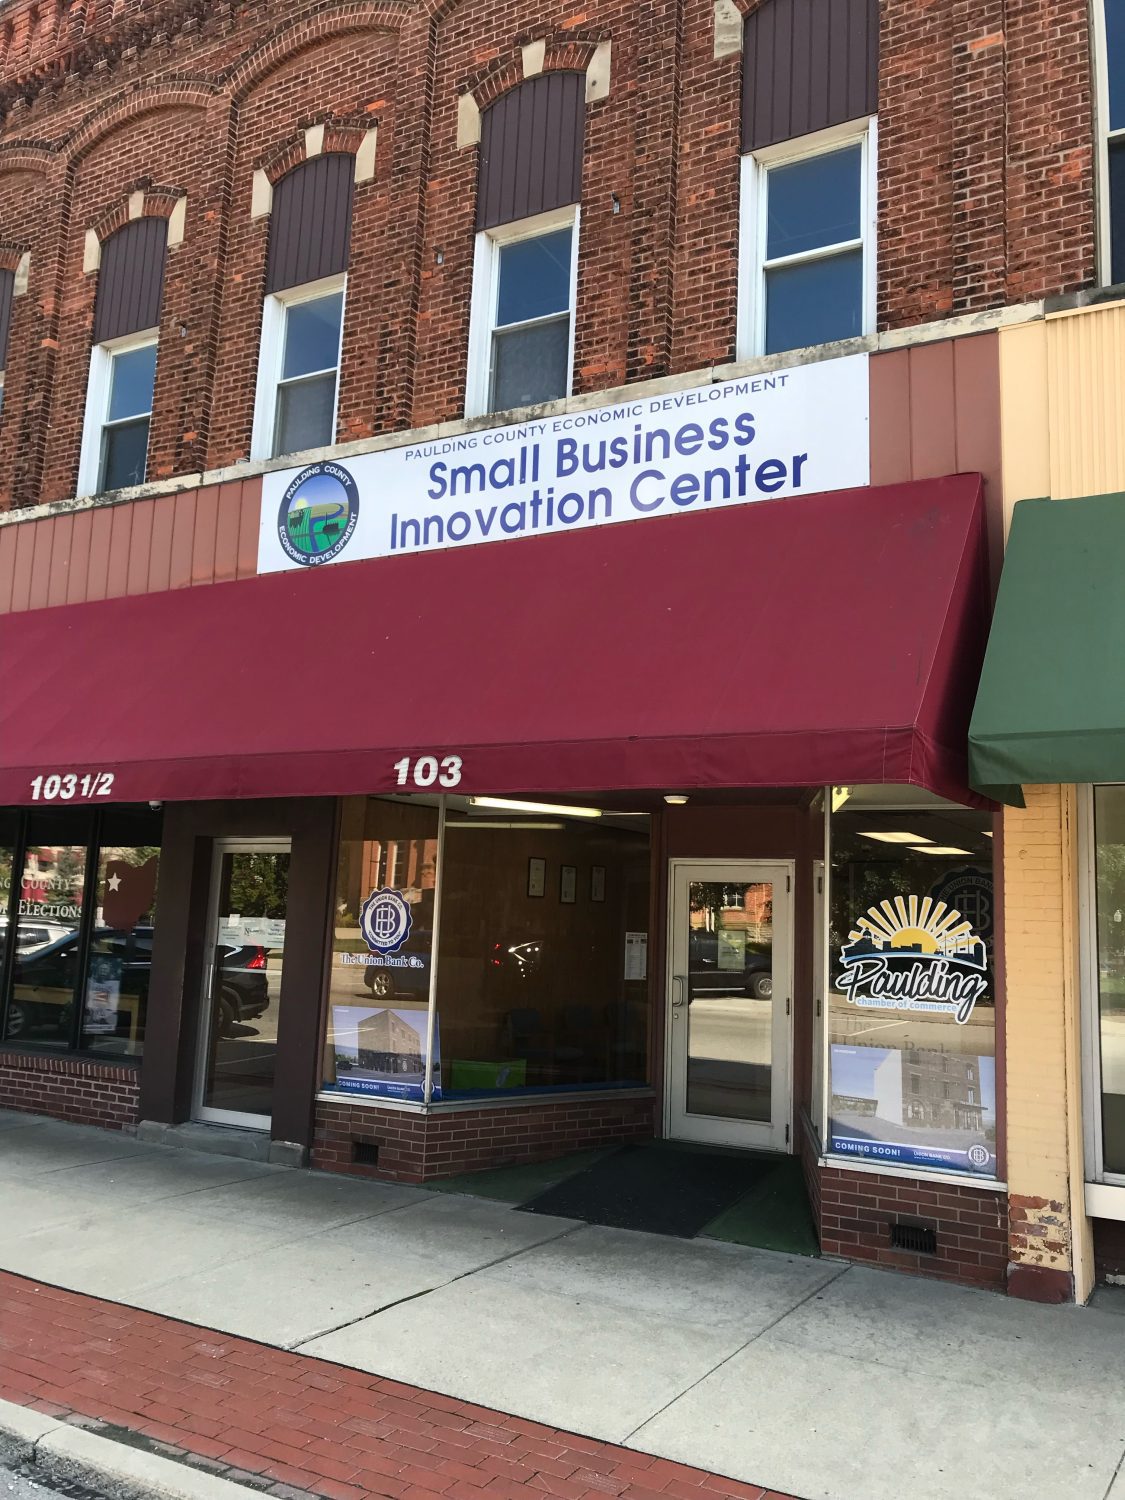 Small Business Innovation Center (SBIC)